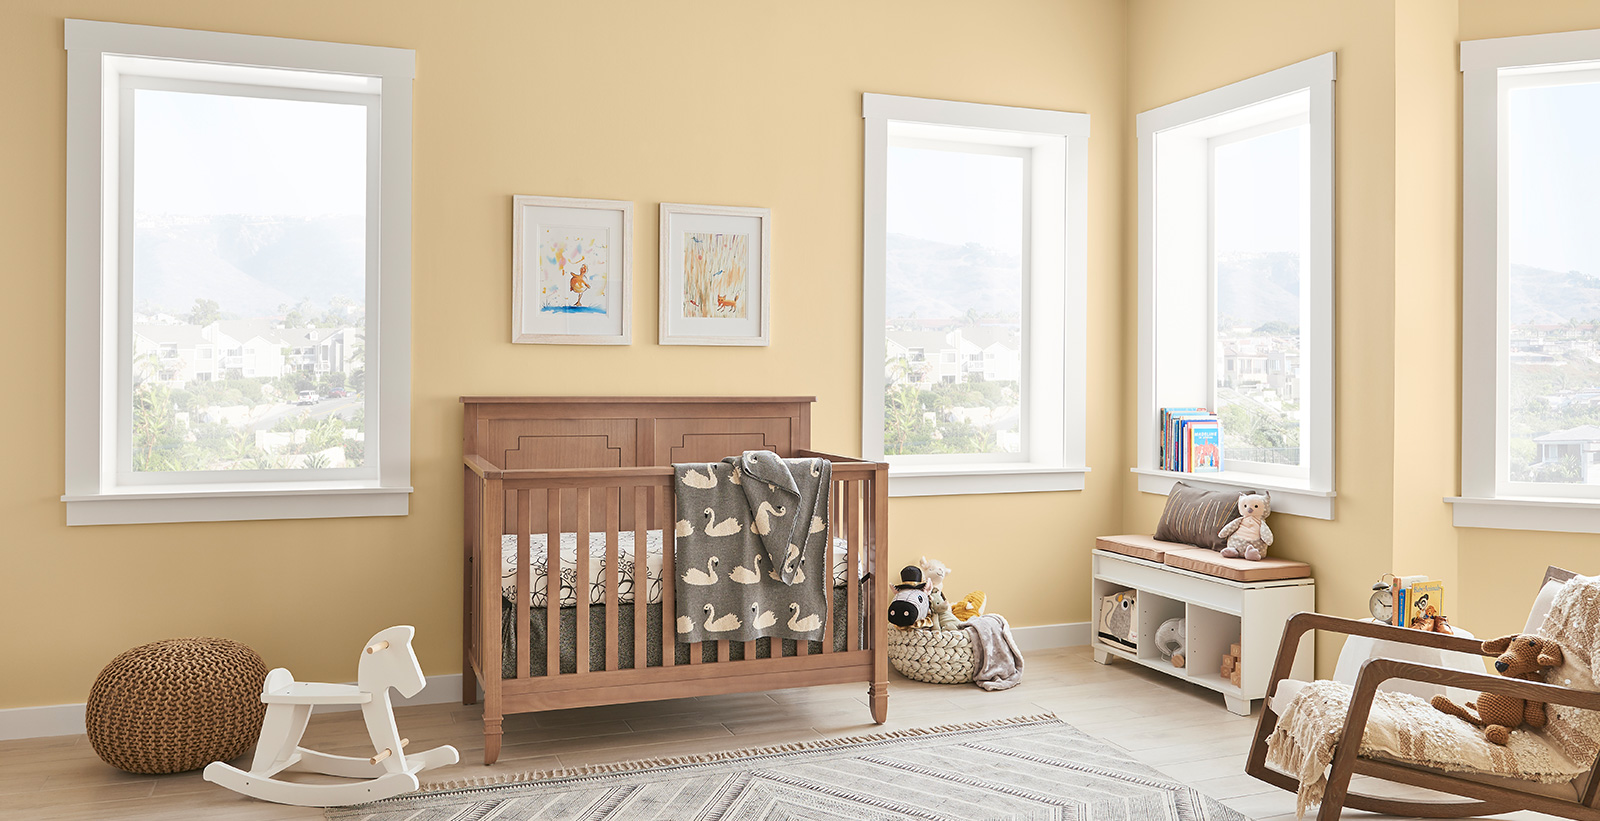 Youth room with yellow walls and white trim, wooden crib, casual style.